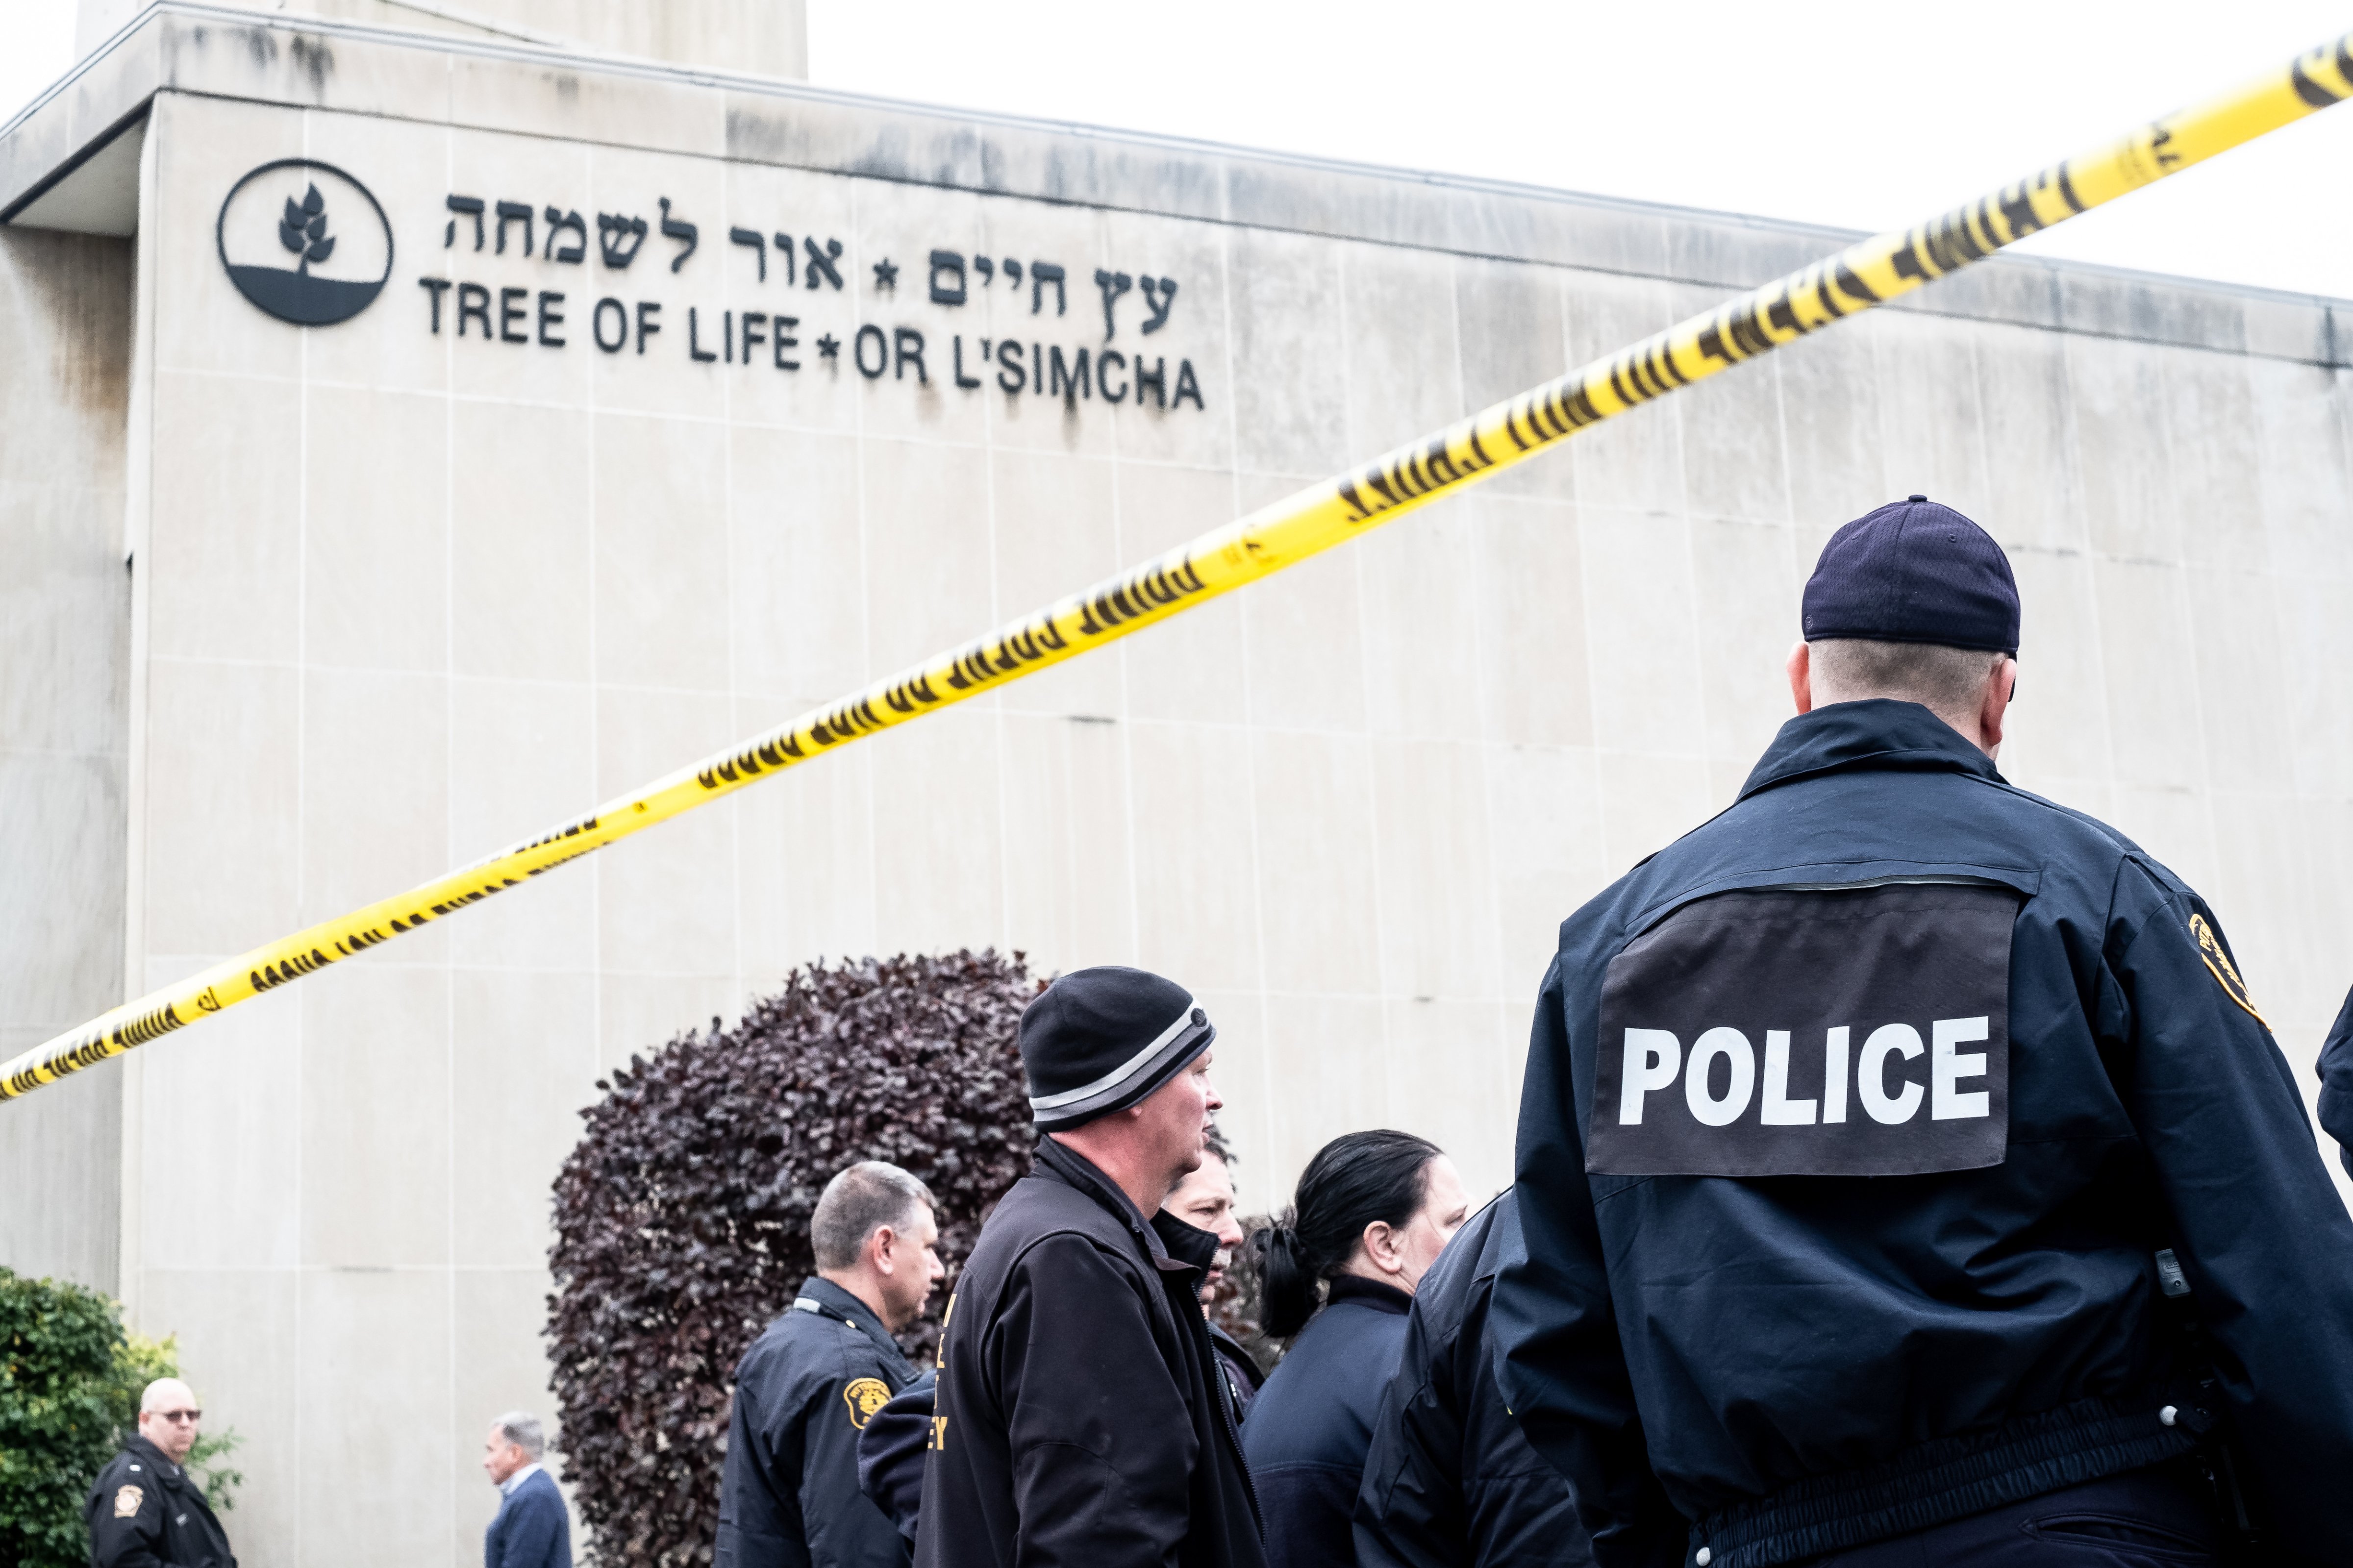 Police seen in front of synagogue.Aftermath of the mass